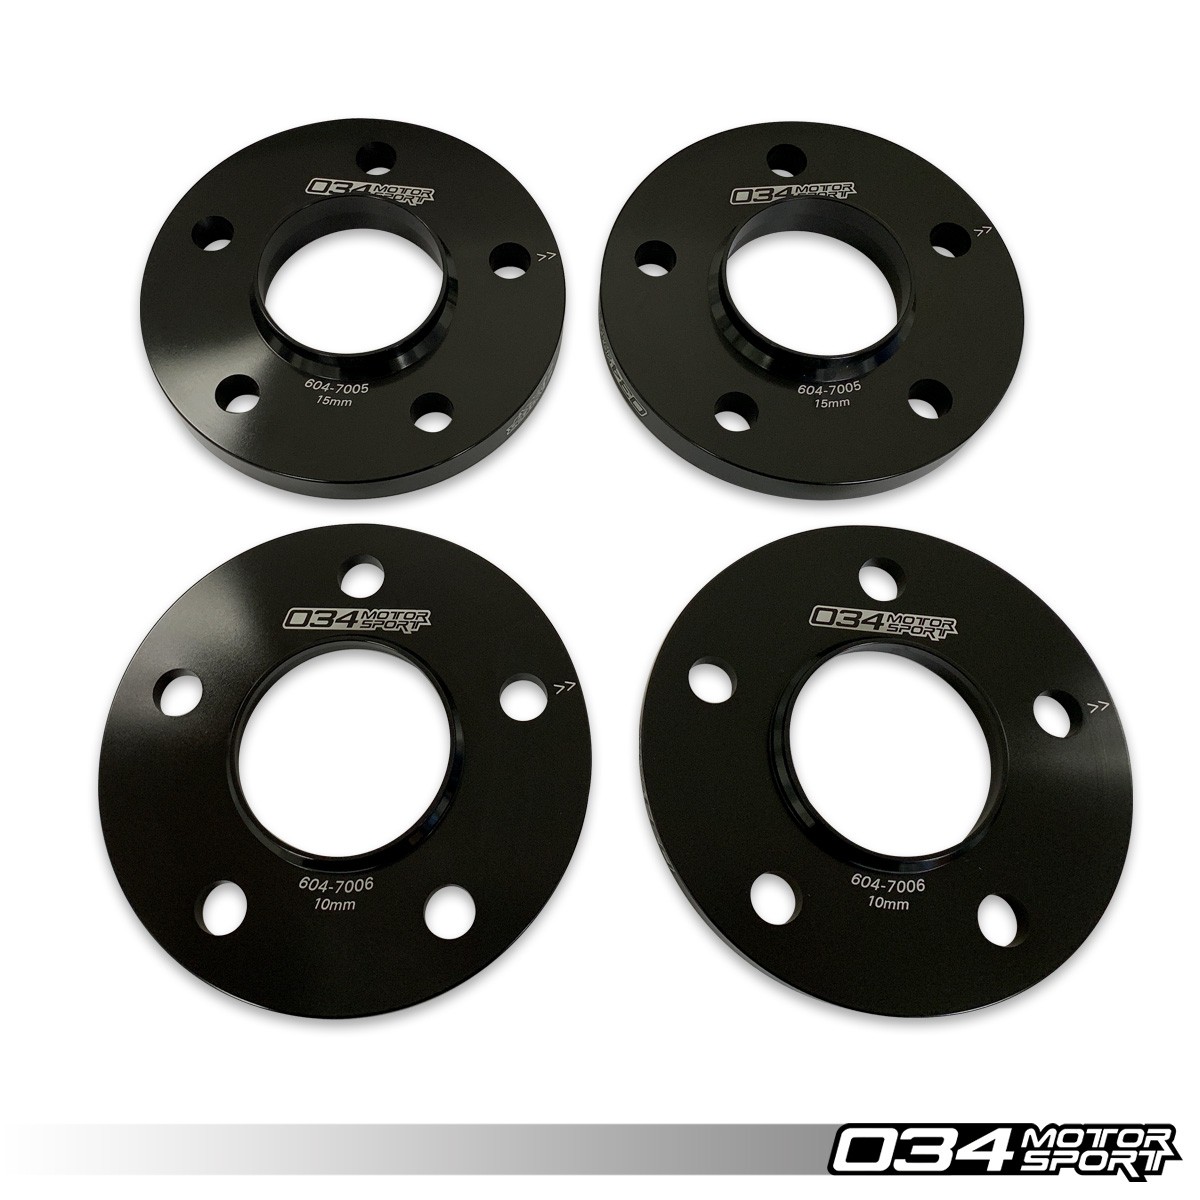 TPI 15mm Hubcentric Wheel Spacers & Extended Wheel Bolts Audi A5 2007 